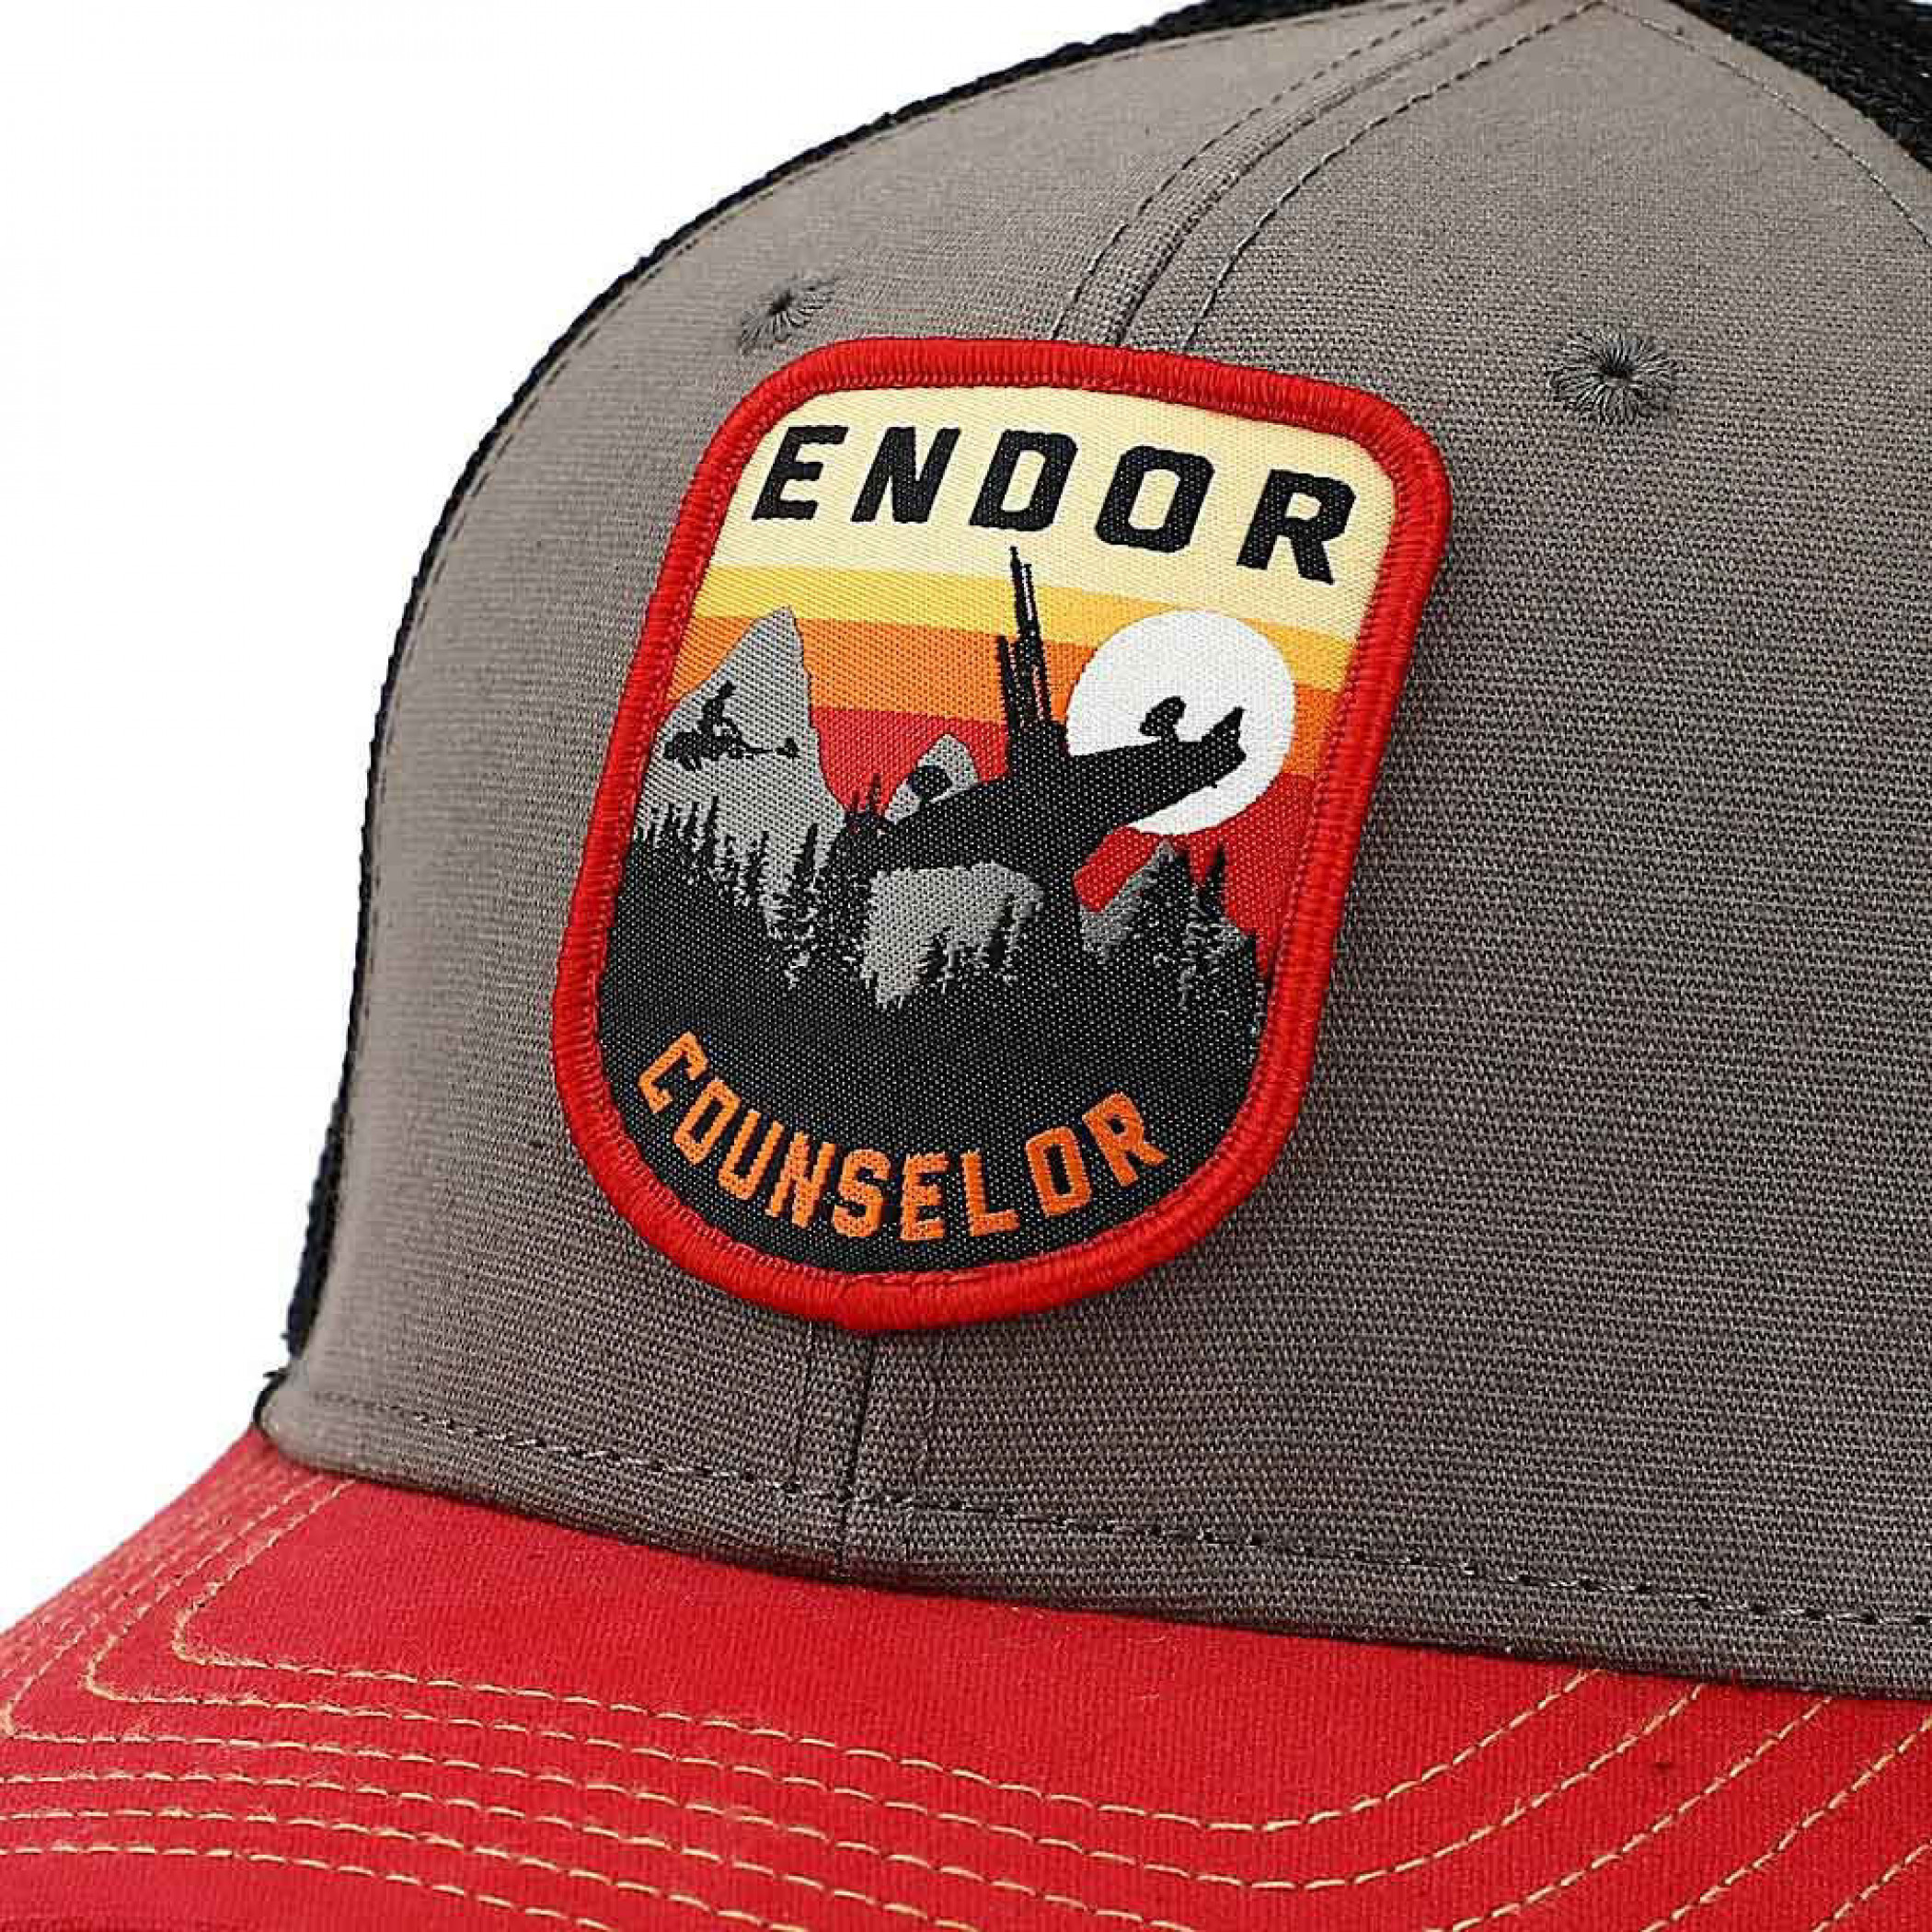 Star Wars Endor Camp Counselor Patch Pre-Curved Trucker Hat